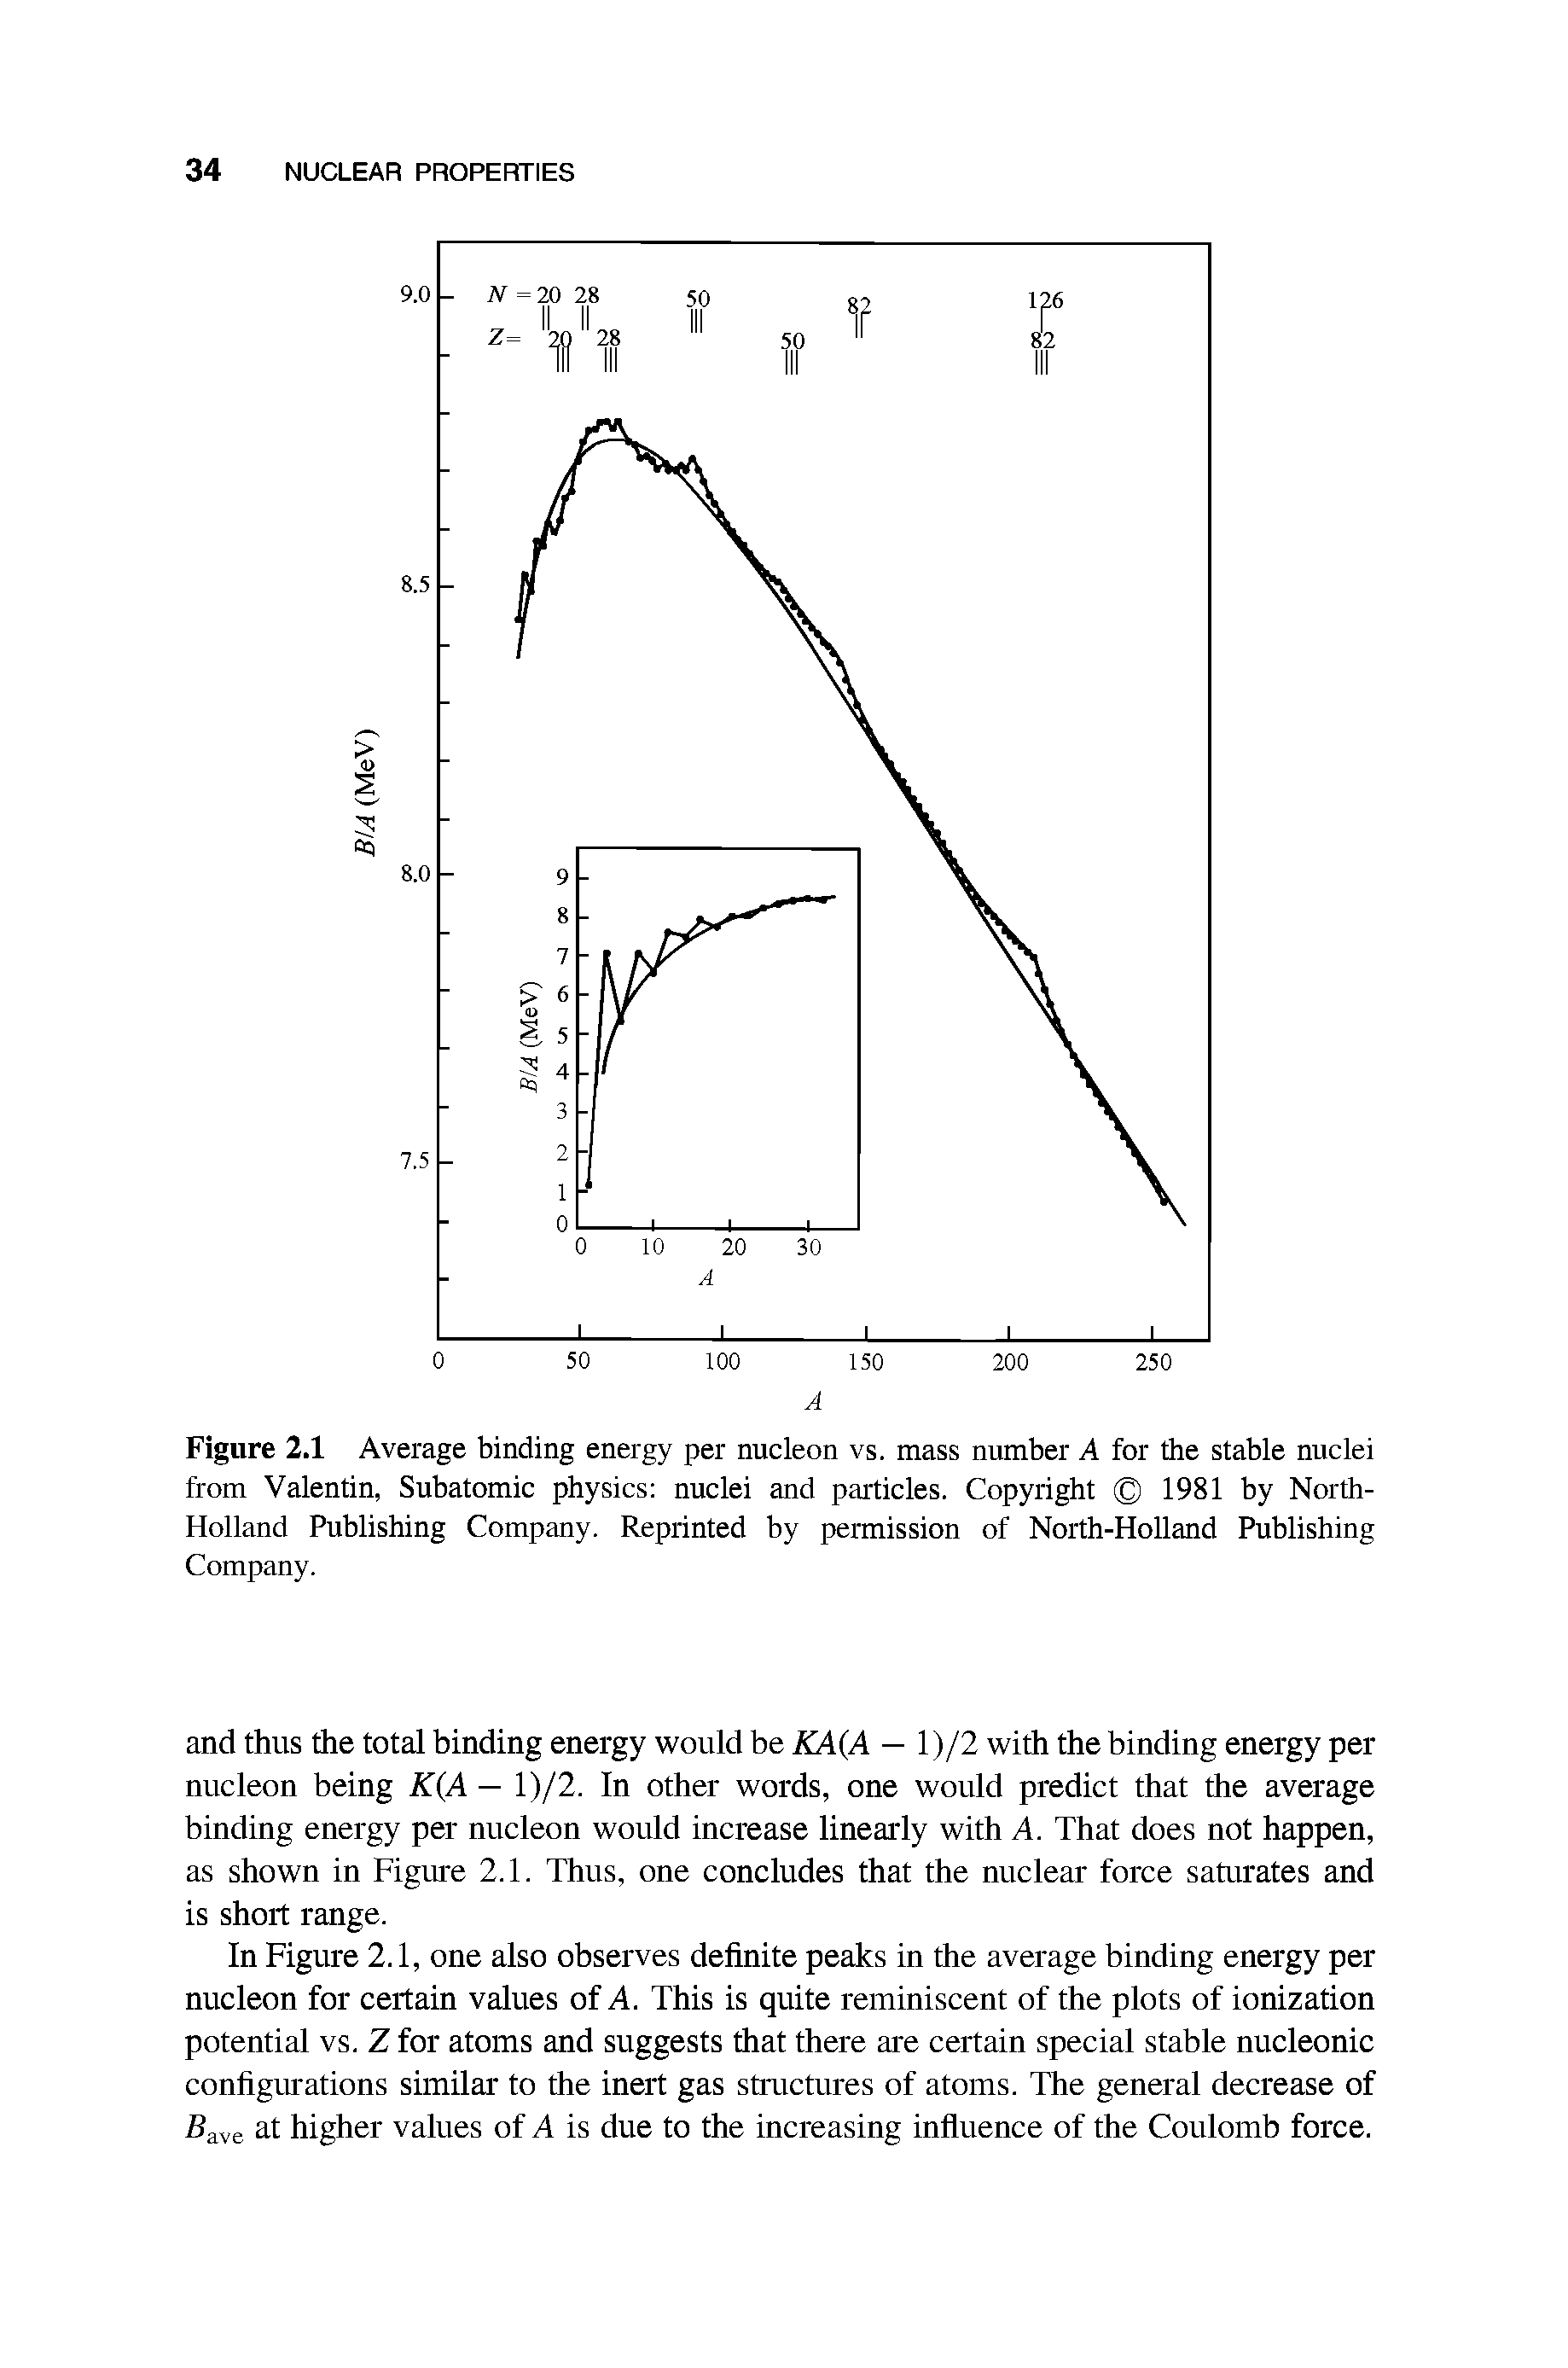 Figure 2.1 Average binding energy per nucleon vs. mass number A for the stable nuclei from Valentin, Subatomic physics nuclei and particles. Copyright 1981 by North-Holland Publishing Company. Reprinted by permission of North-Holland Publishing Company.